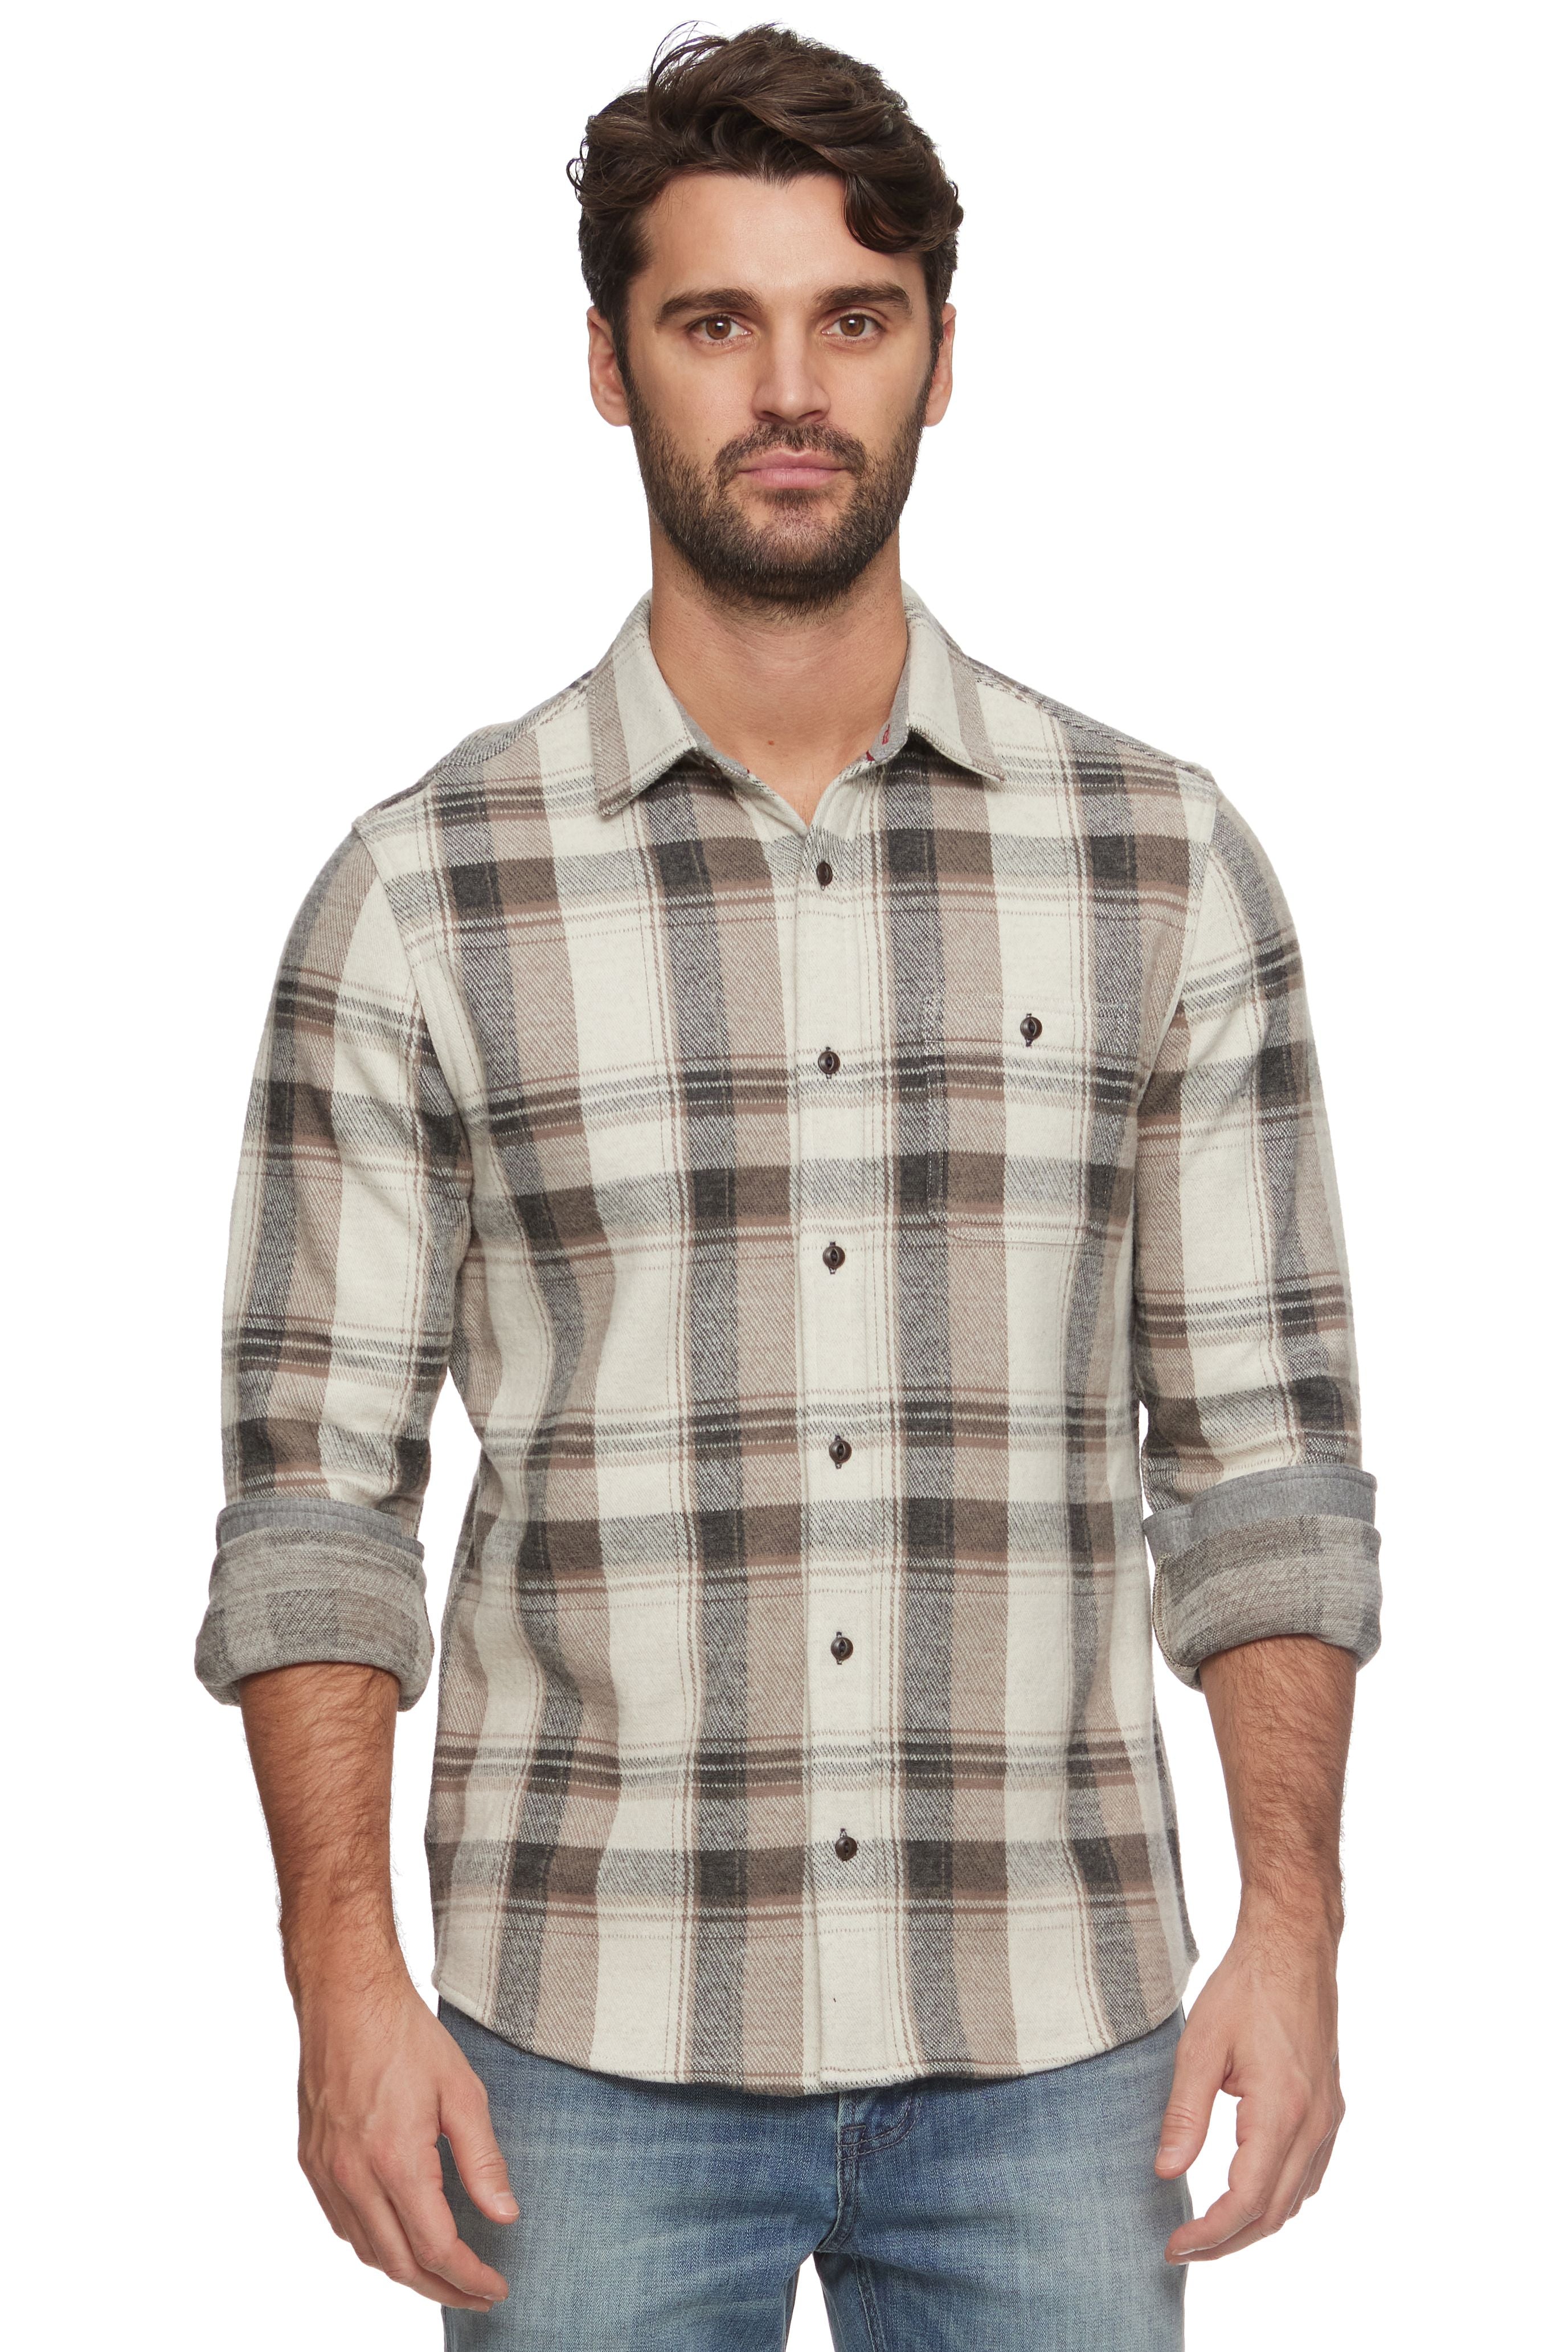 CLEARBROOK LS HERO KNIT FLANNEL SHIRT